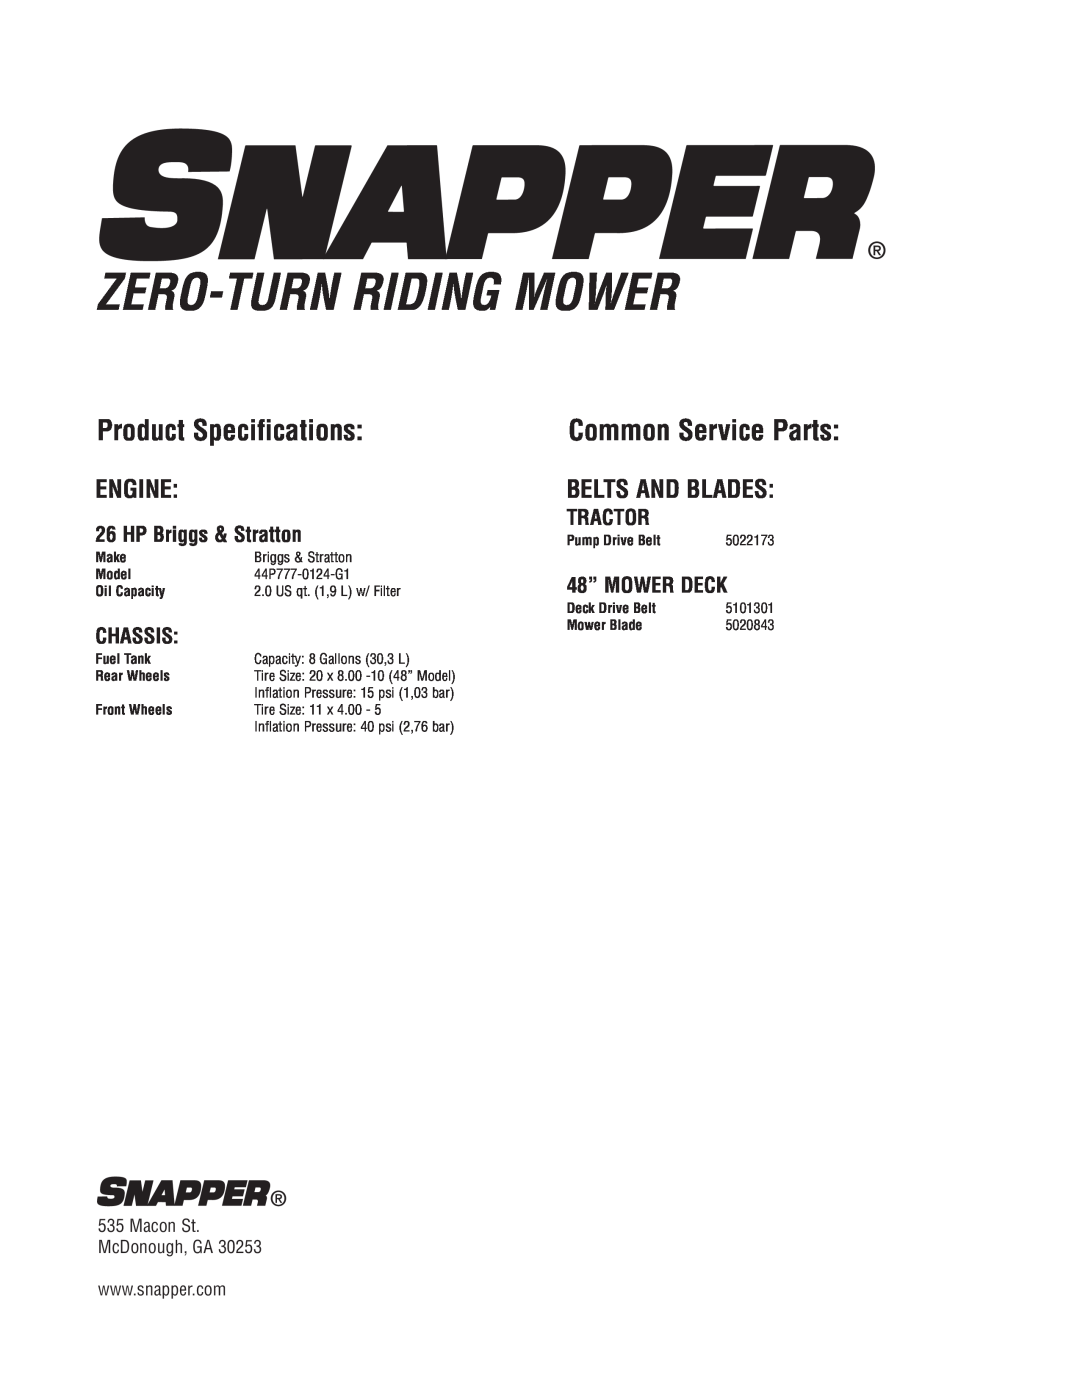 Snapper 500Z manual Product Specifications, Common Service Parts, Engine, Belts And Blades, Zero-Turn Riding Mower, Chassis 